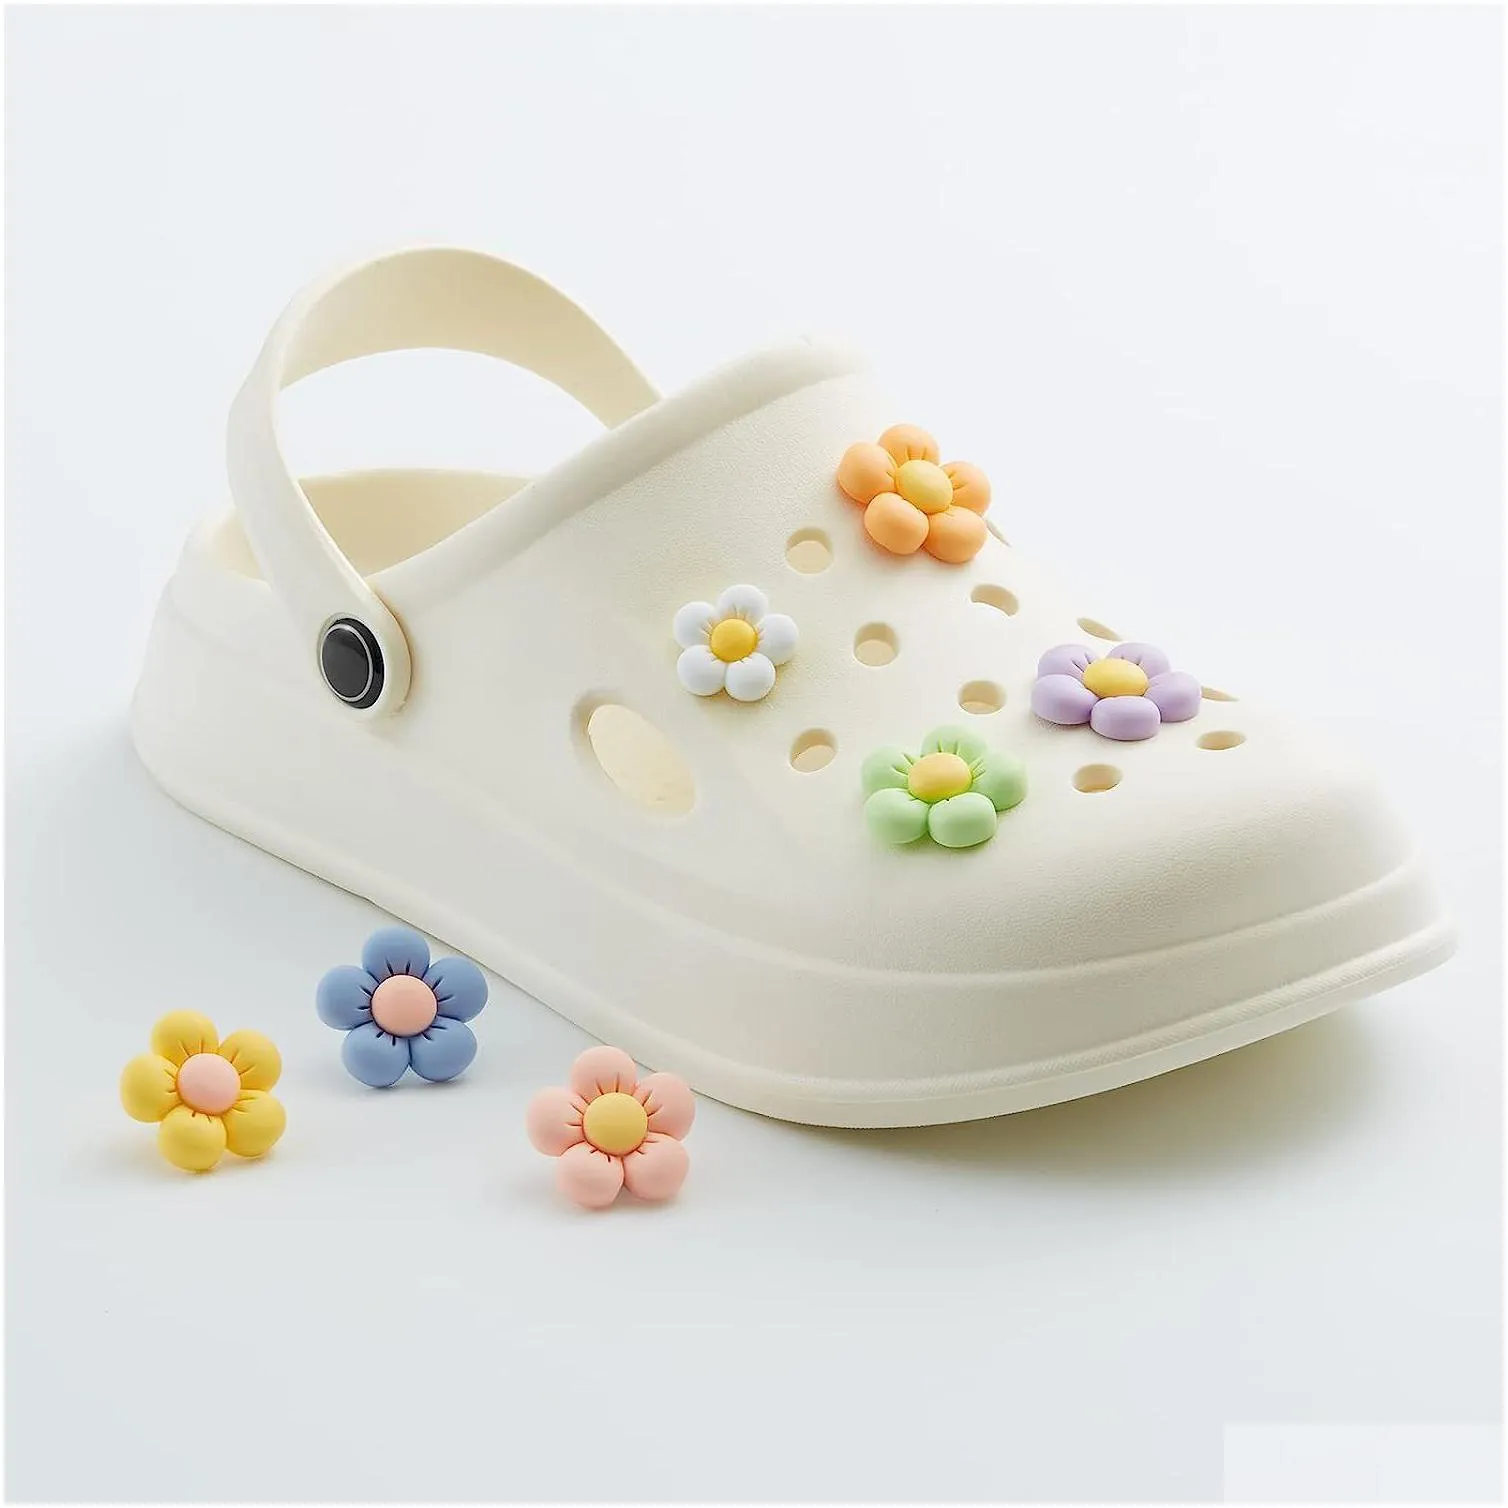 6 pieces of floral shoes ornaments flower clogodile charm kawaii shoes decorative pendant for girls kids teens ladies resin gem hot selling resin